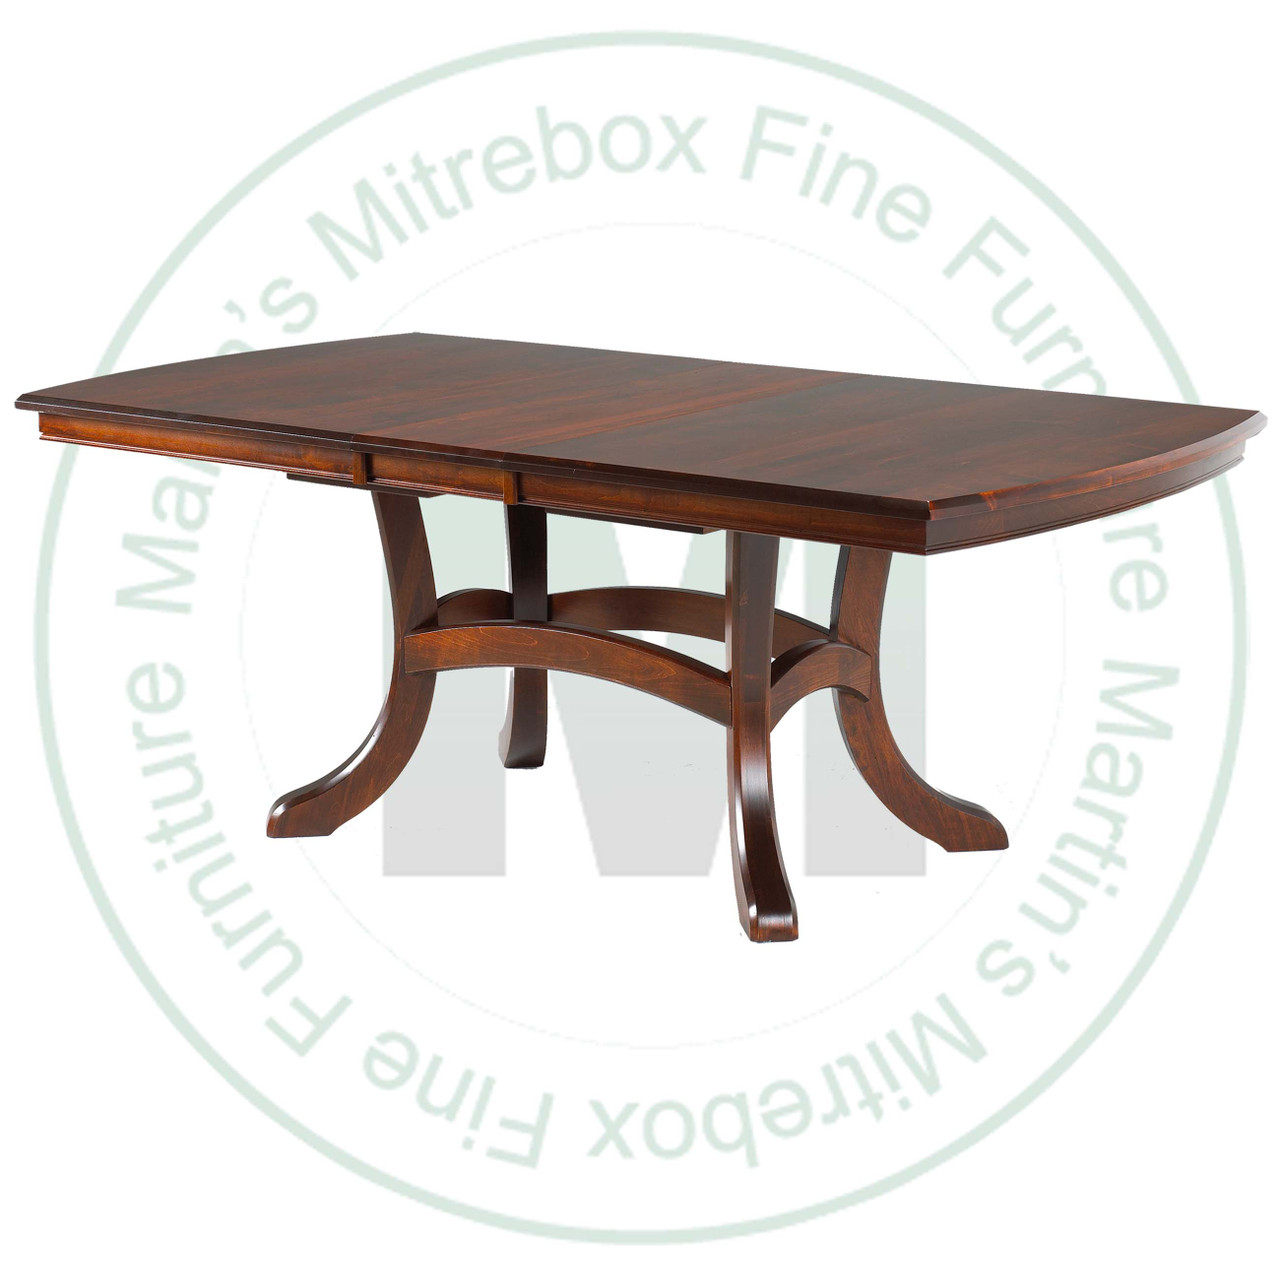 Maple Jordan Double Pedestal Solid Top Table 54''D x 96''W x 30''H. Table Has 1.25'' Thick Top